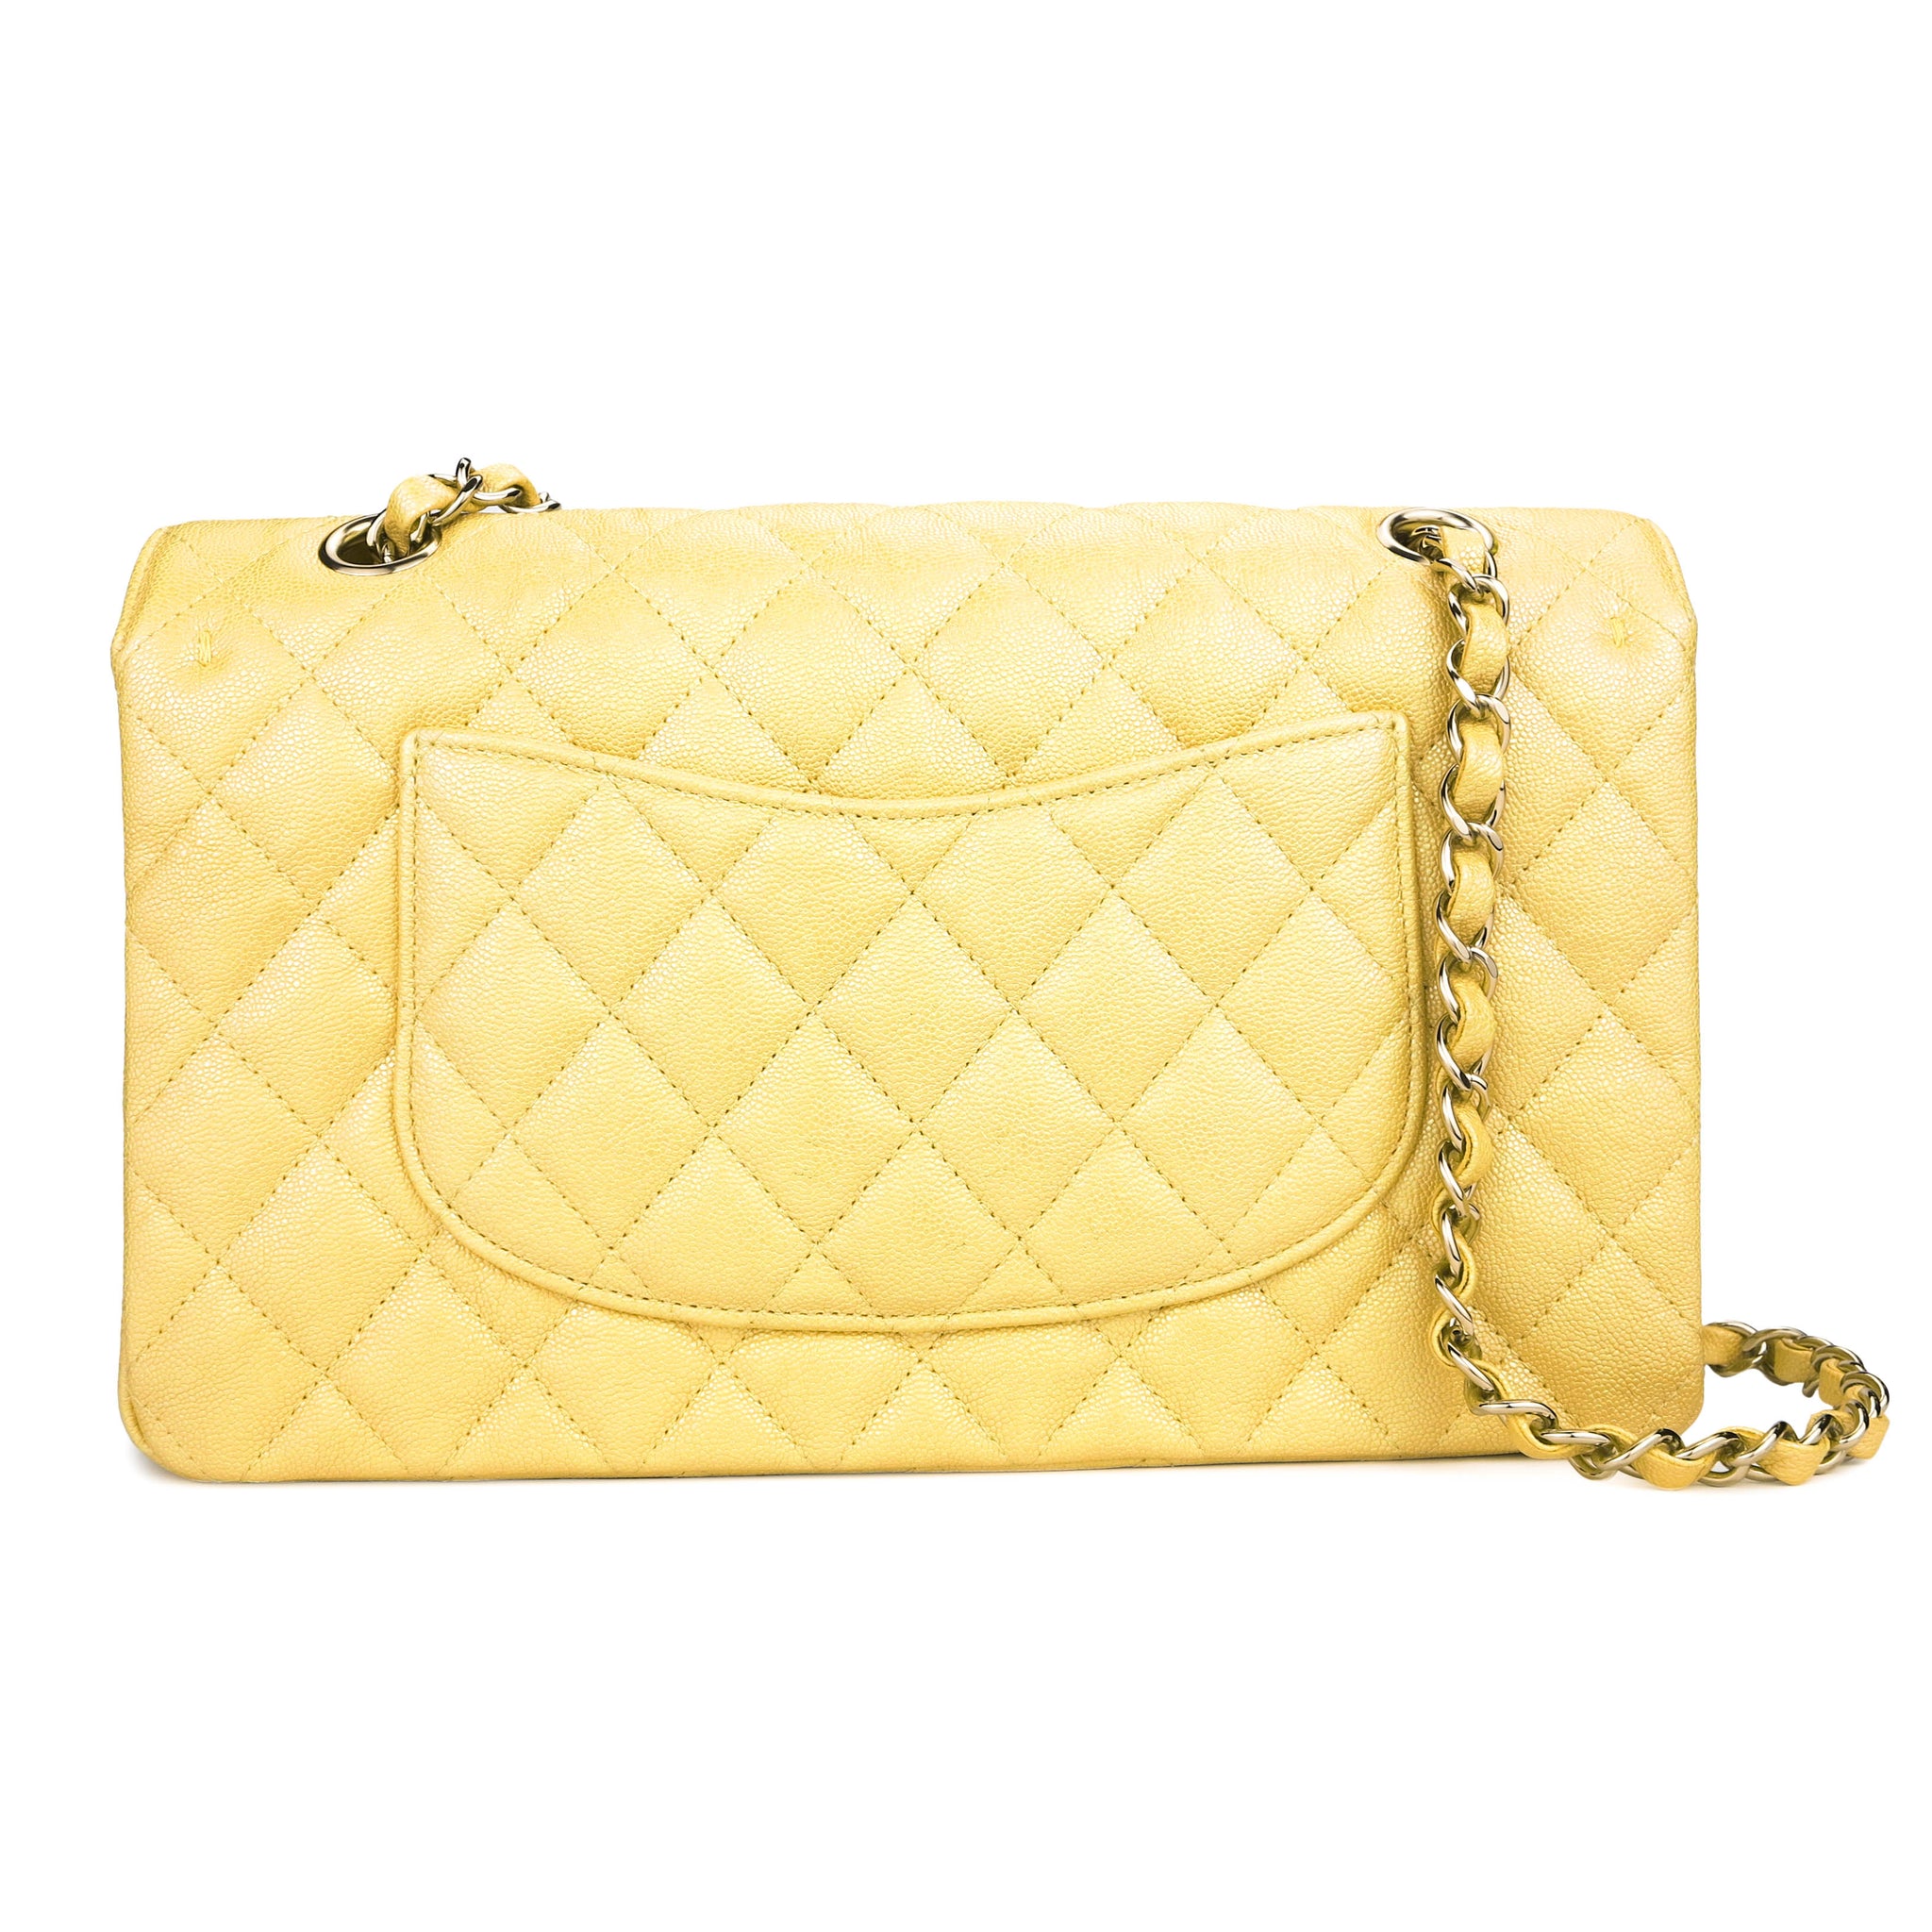 Chanel Yellow Quilted Goatskin Leather Chanel 19 Flap Bag  Yoogis Closet